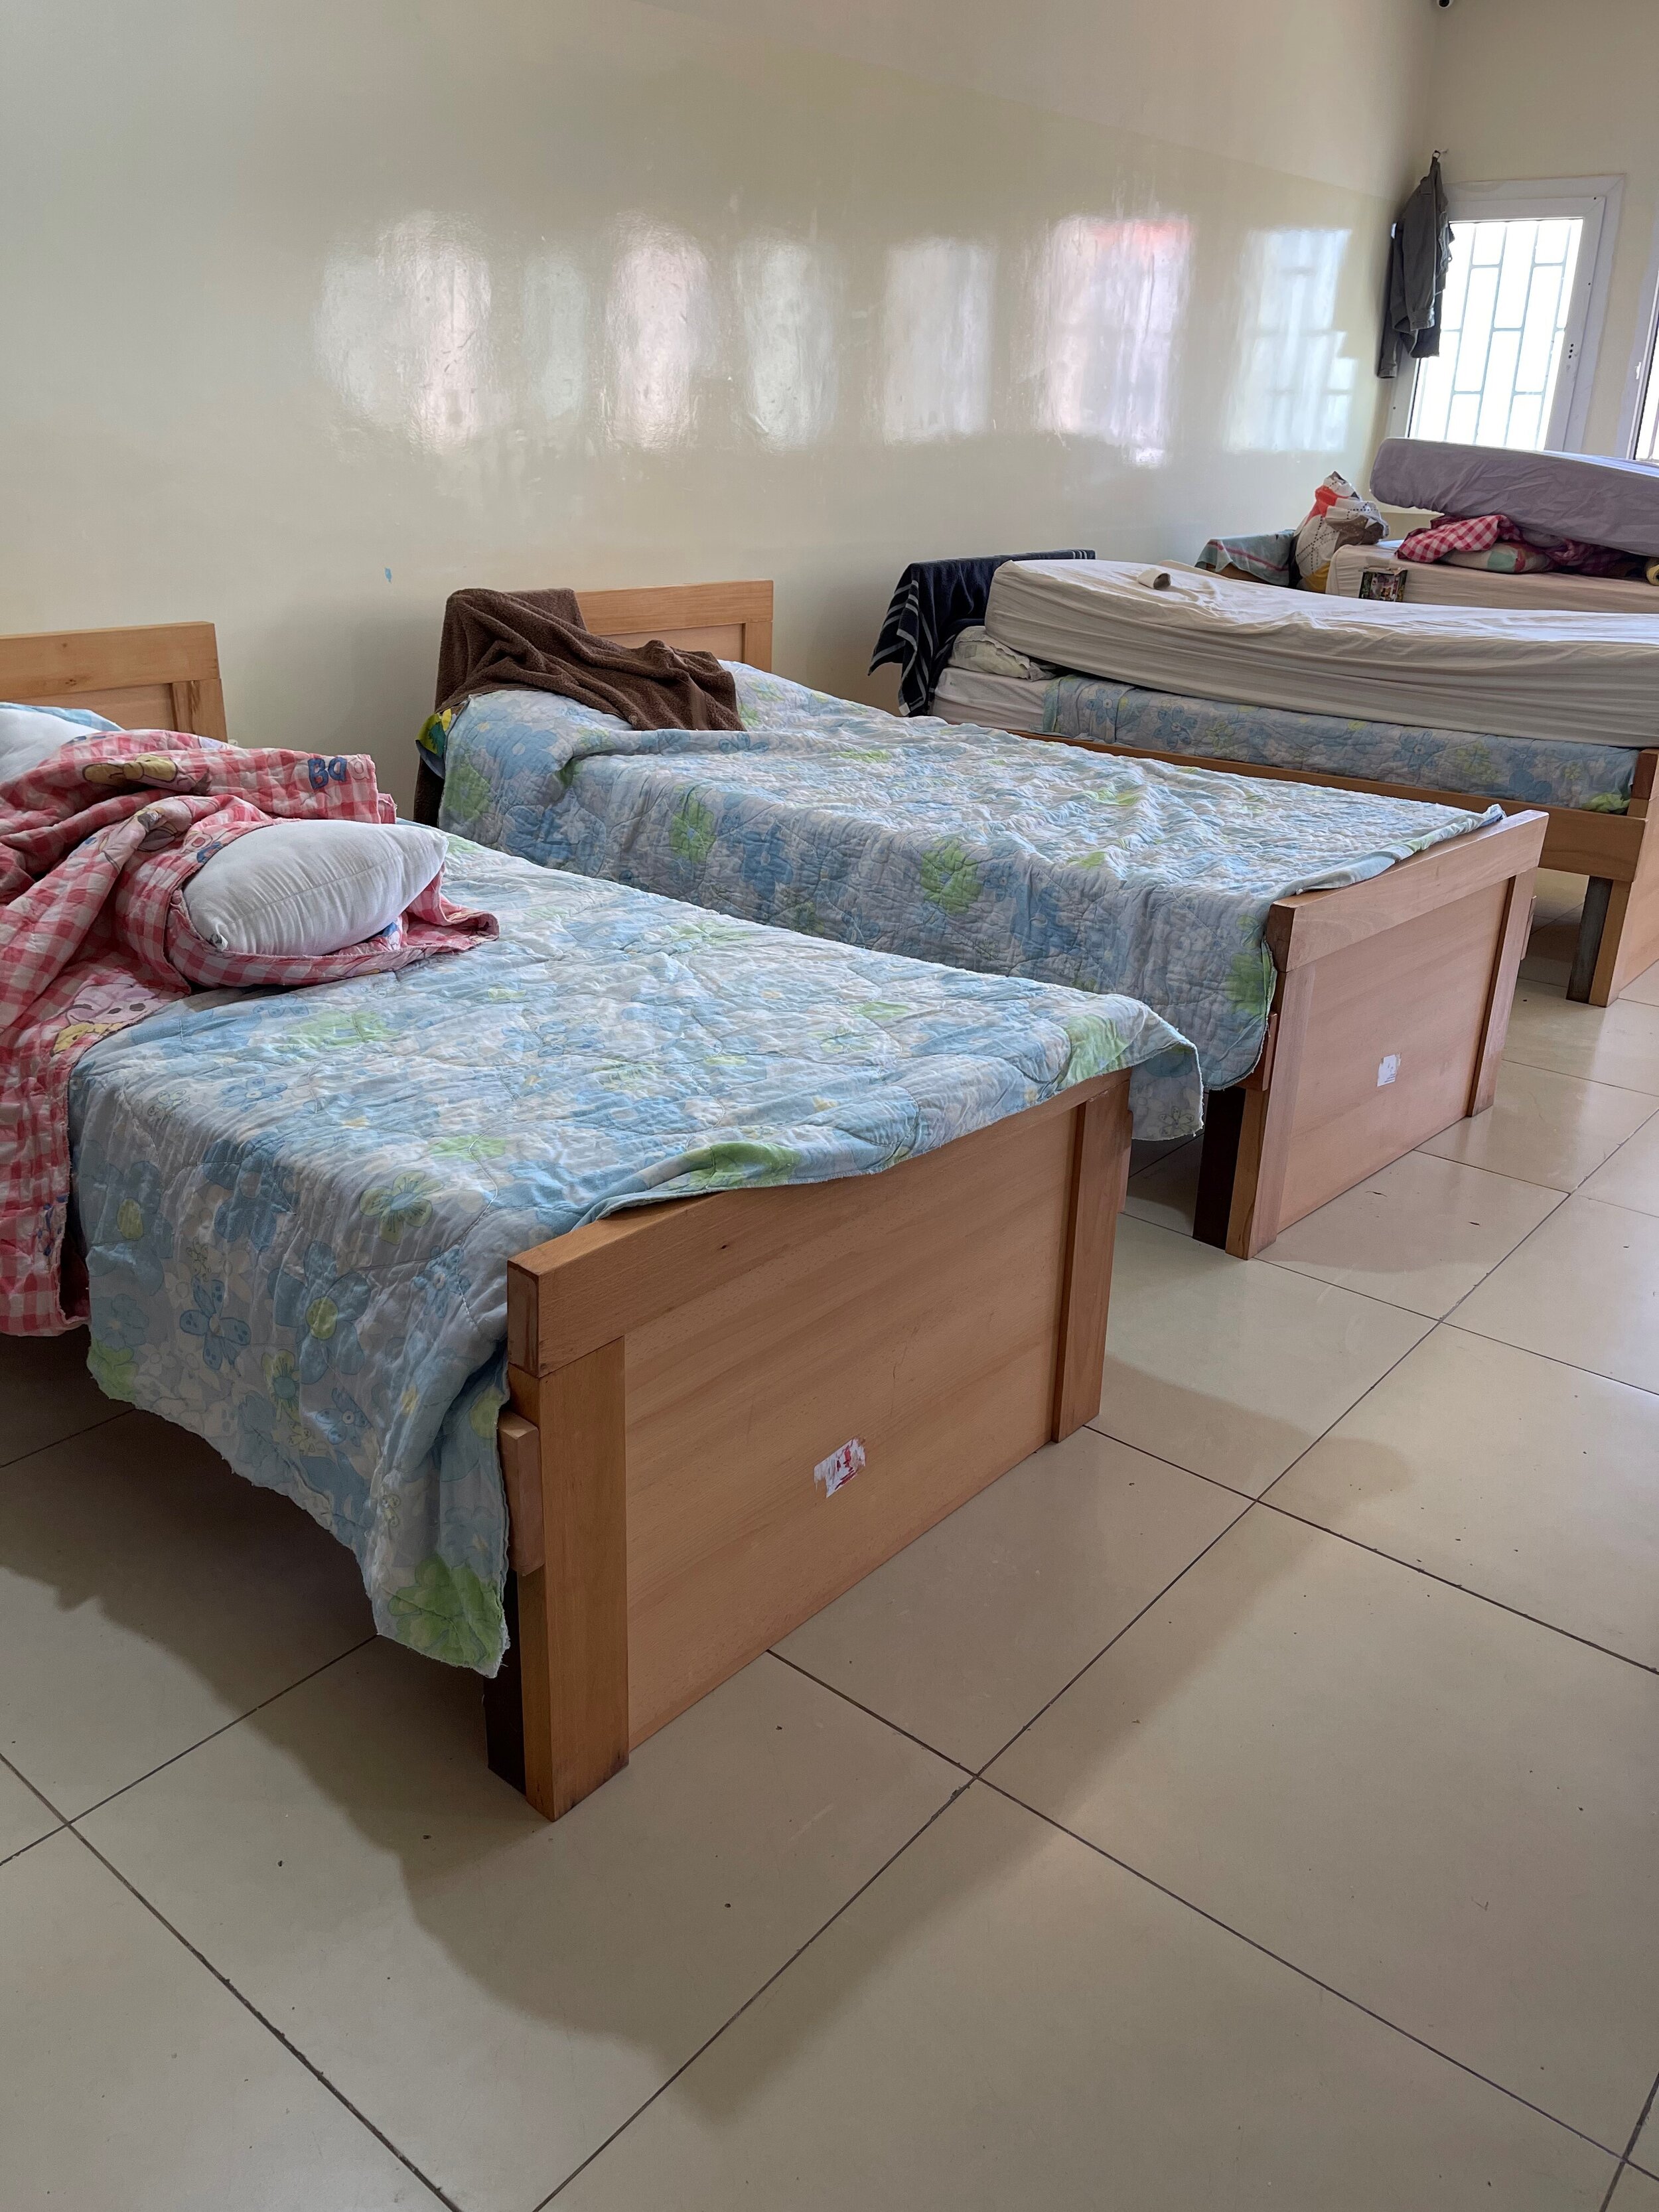   The children sometimes act out their emotional upheaval in destructive ways such as breaking their beds. These new ones (which Outreach helped to secure) have fared well – the staff encouraged each child to help build their own with the carpenter a